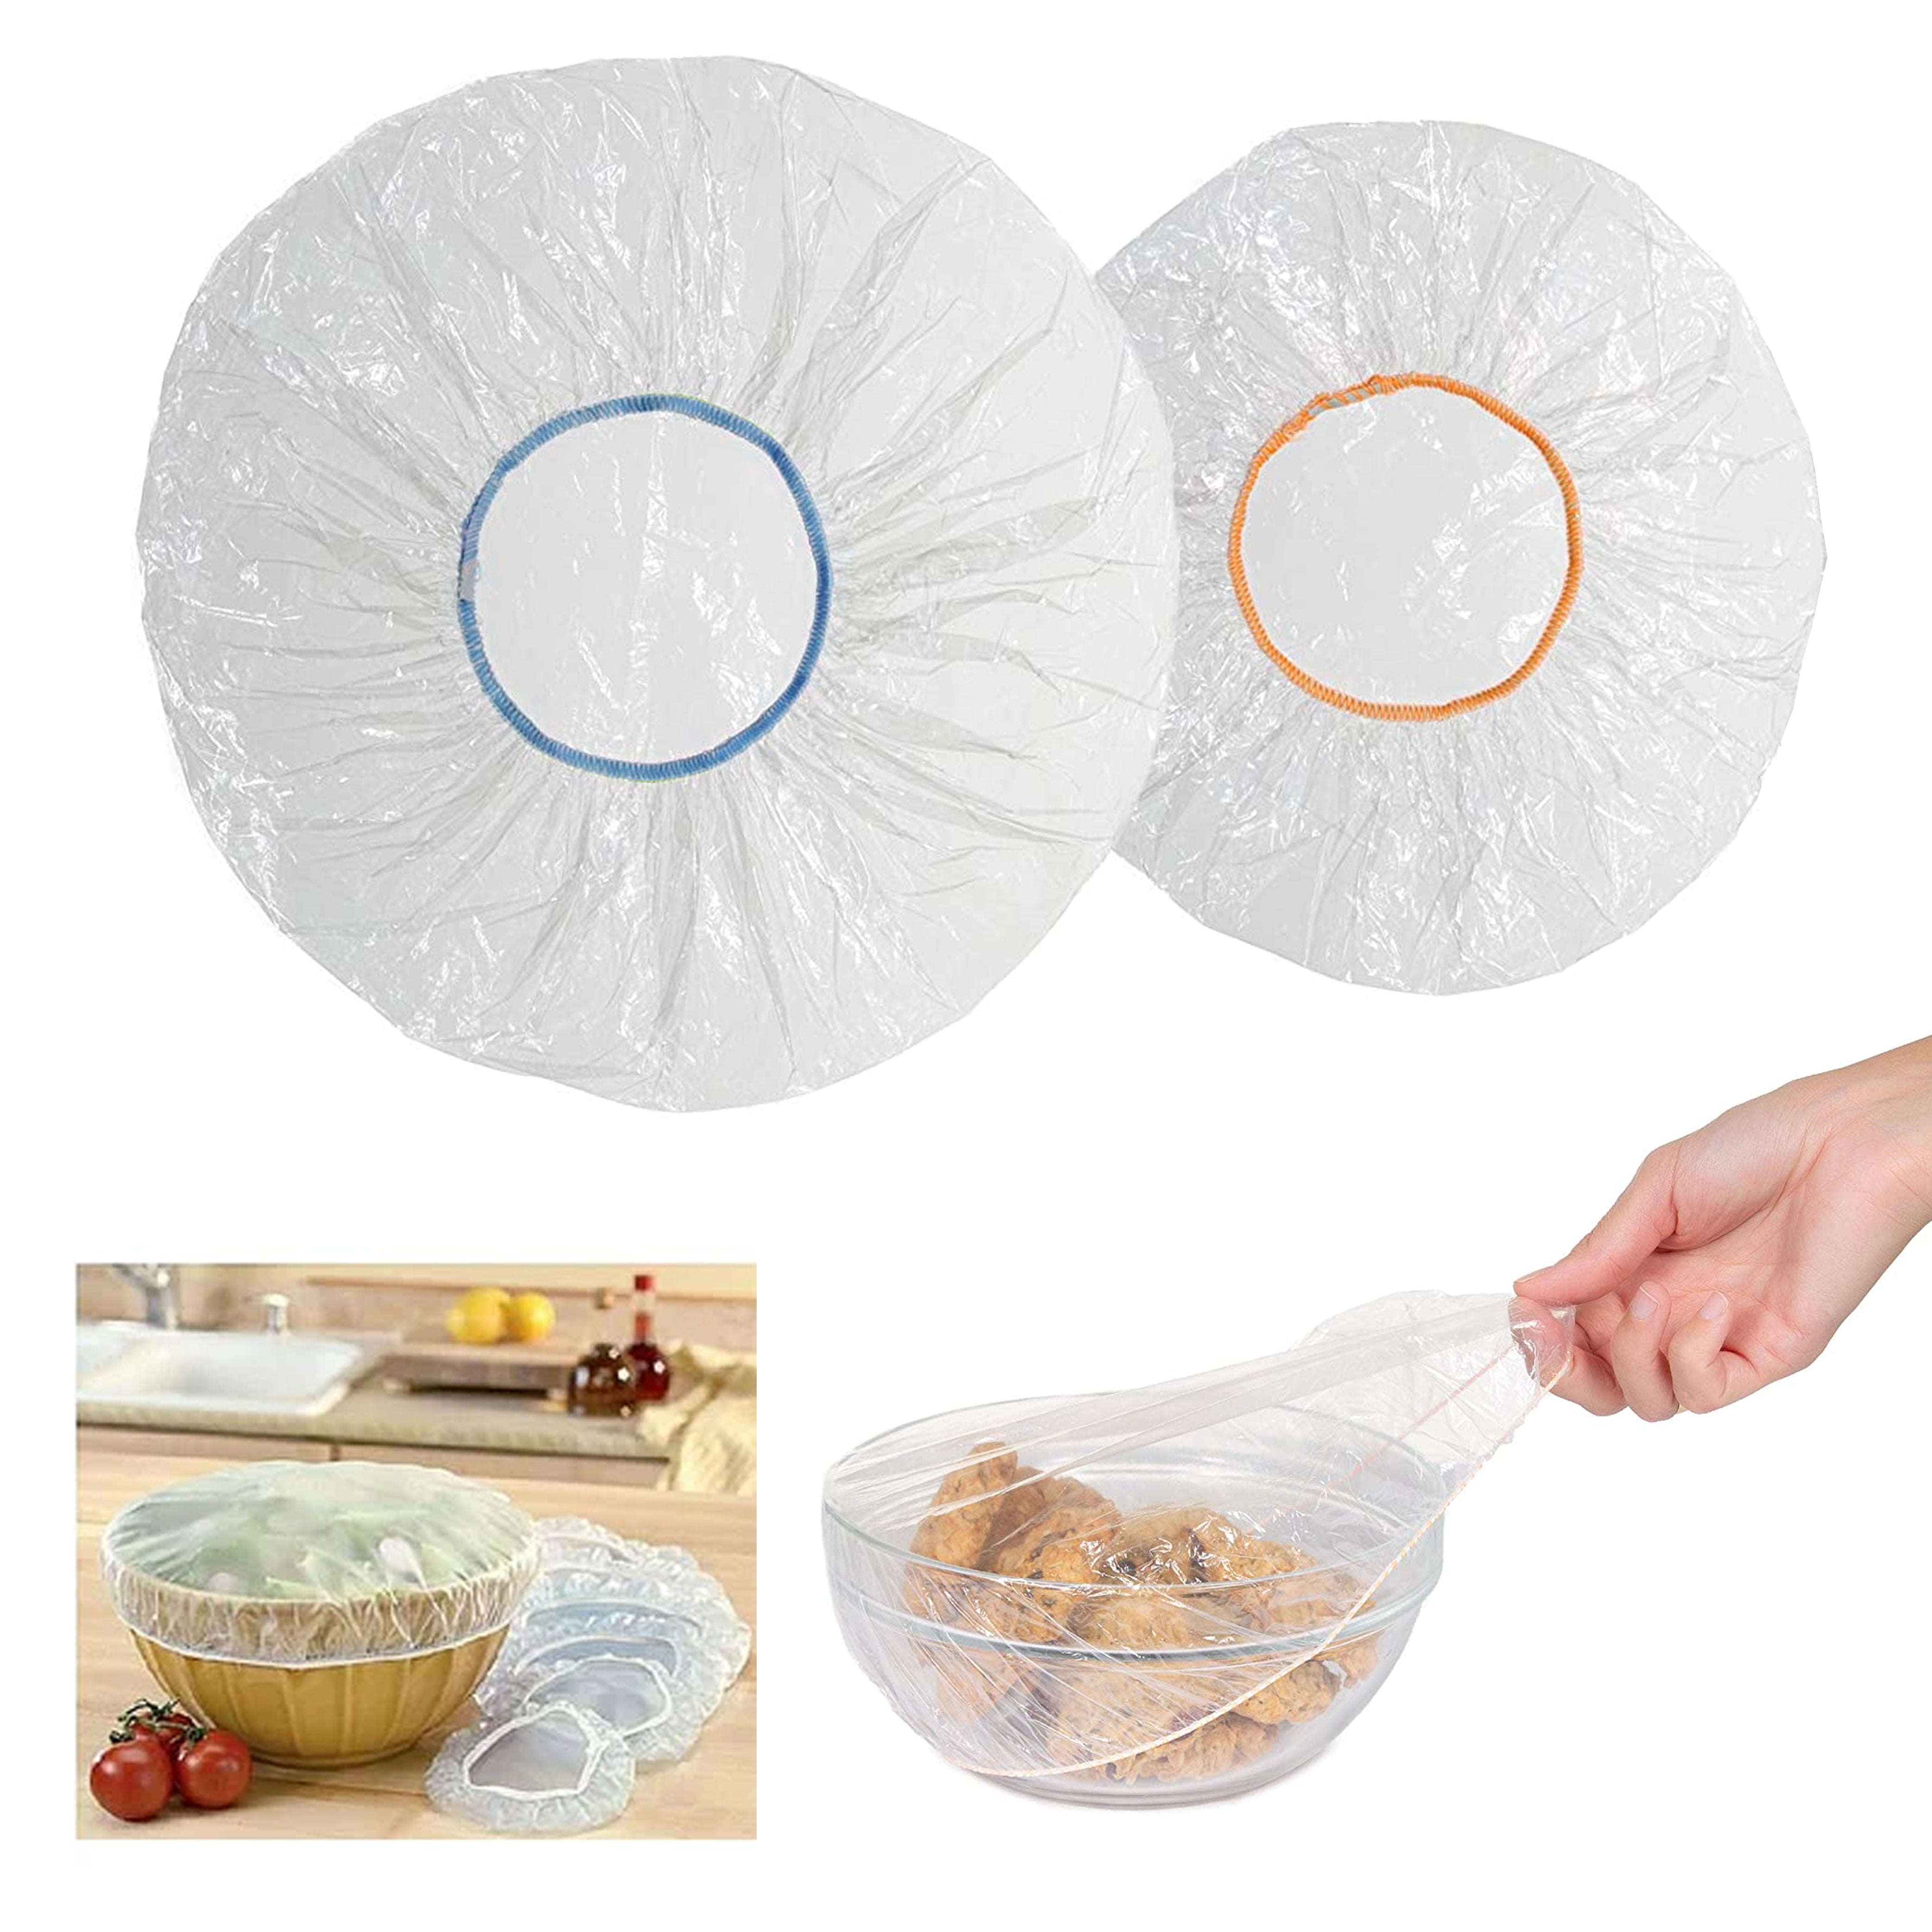 Reusable Durable Food Storage Covers for Bowls Elastic Plate Covers Bowl C B WN 